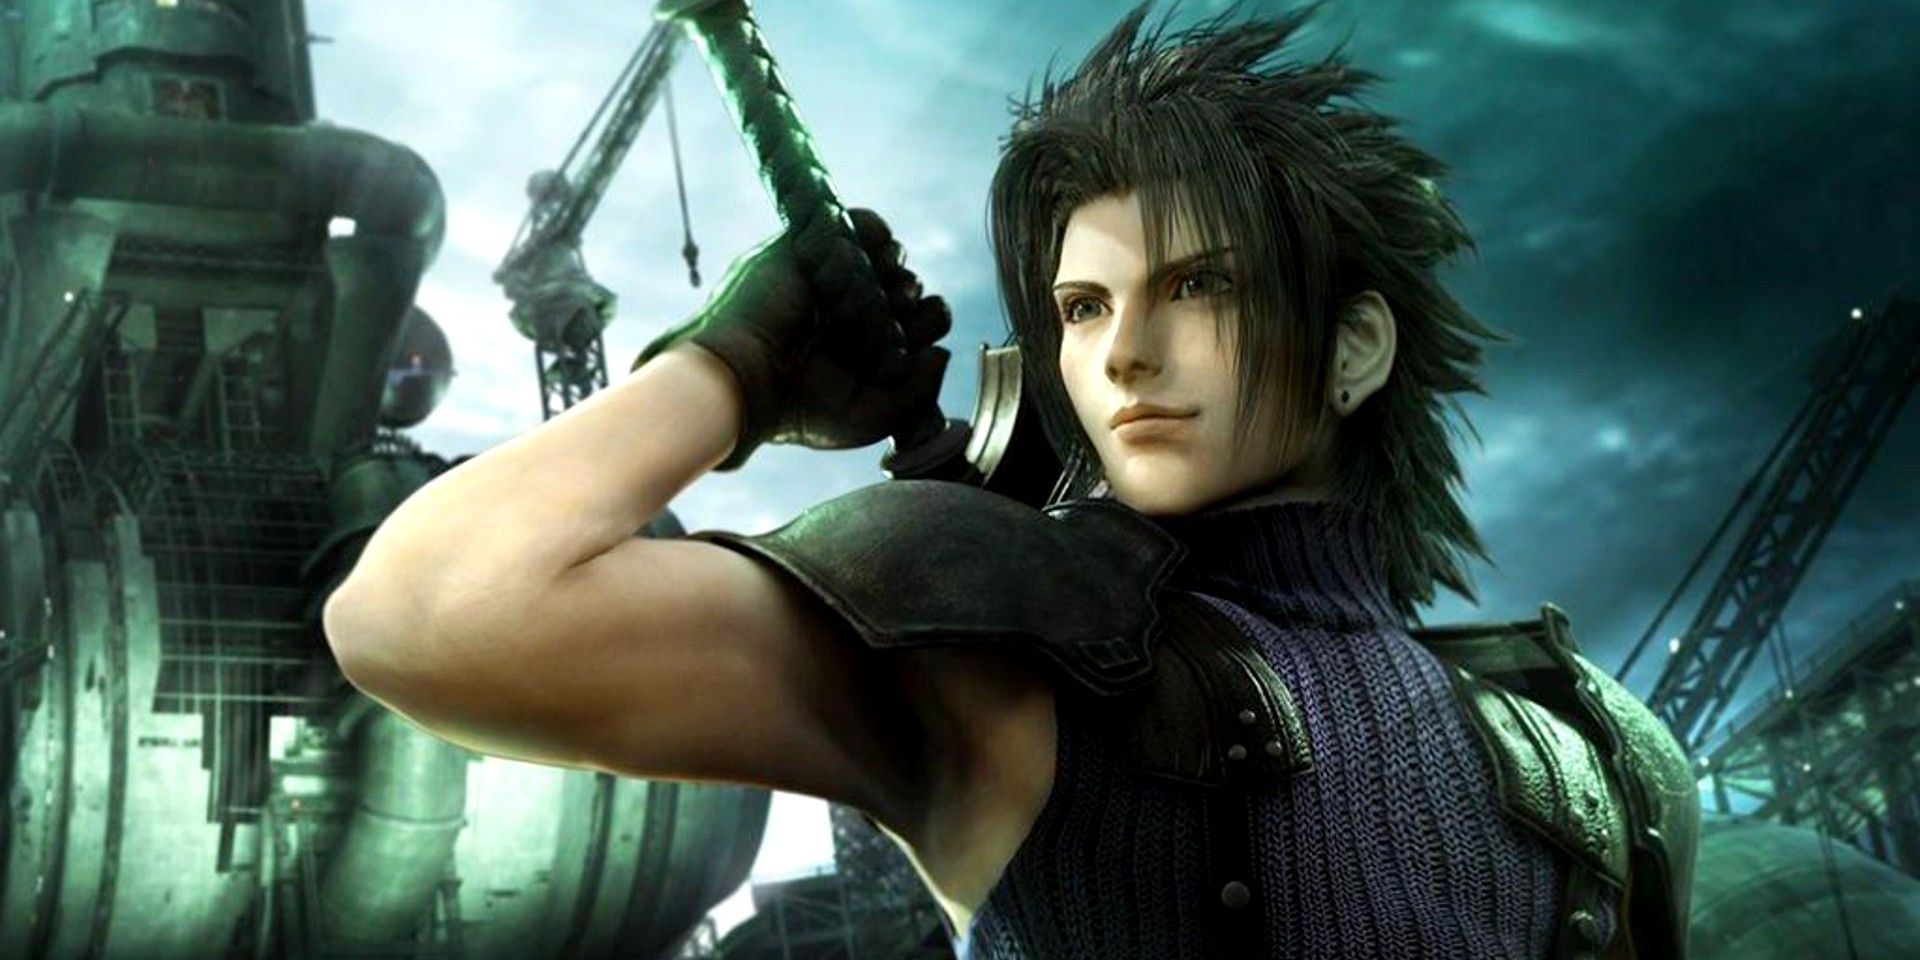 Zack's back for a brand new audience in Crisis Core: Final Fantasy 7 -  Reunion